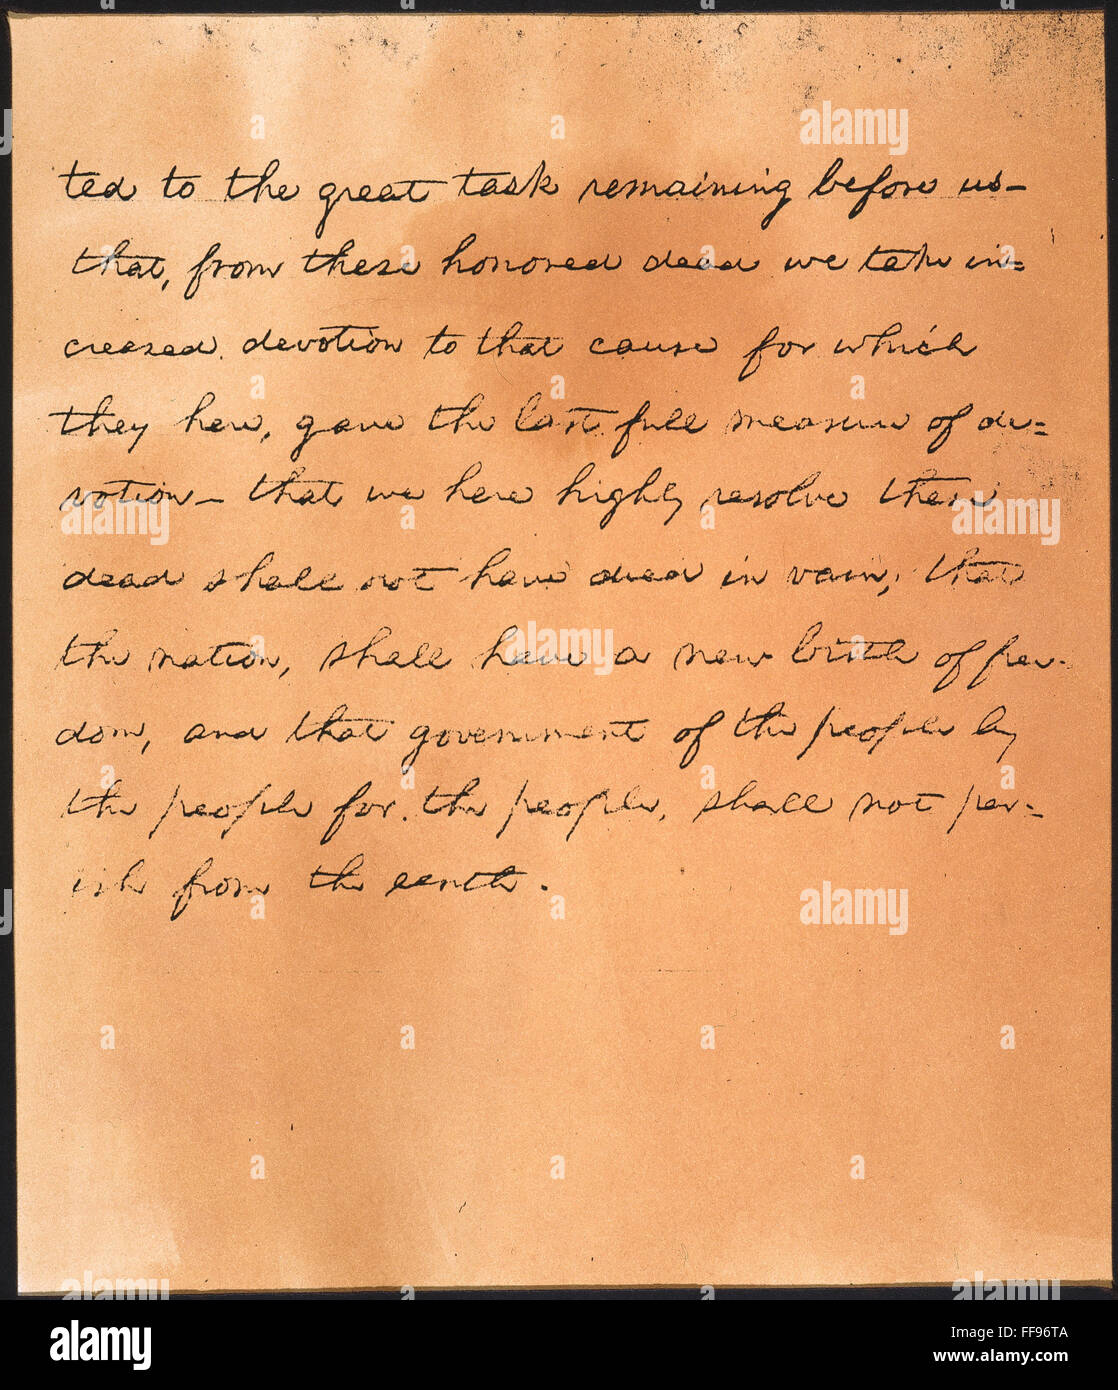 GETTYSBURG ADDRESS. /nSecond and final page of the Nicolay copy of the Gettysburg Address; the earliest extant version in Abraham Lincoln's handwriting, written at Washington, D.C. shortly before 18 November 1863. Stock Photo